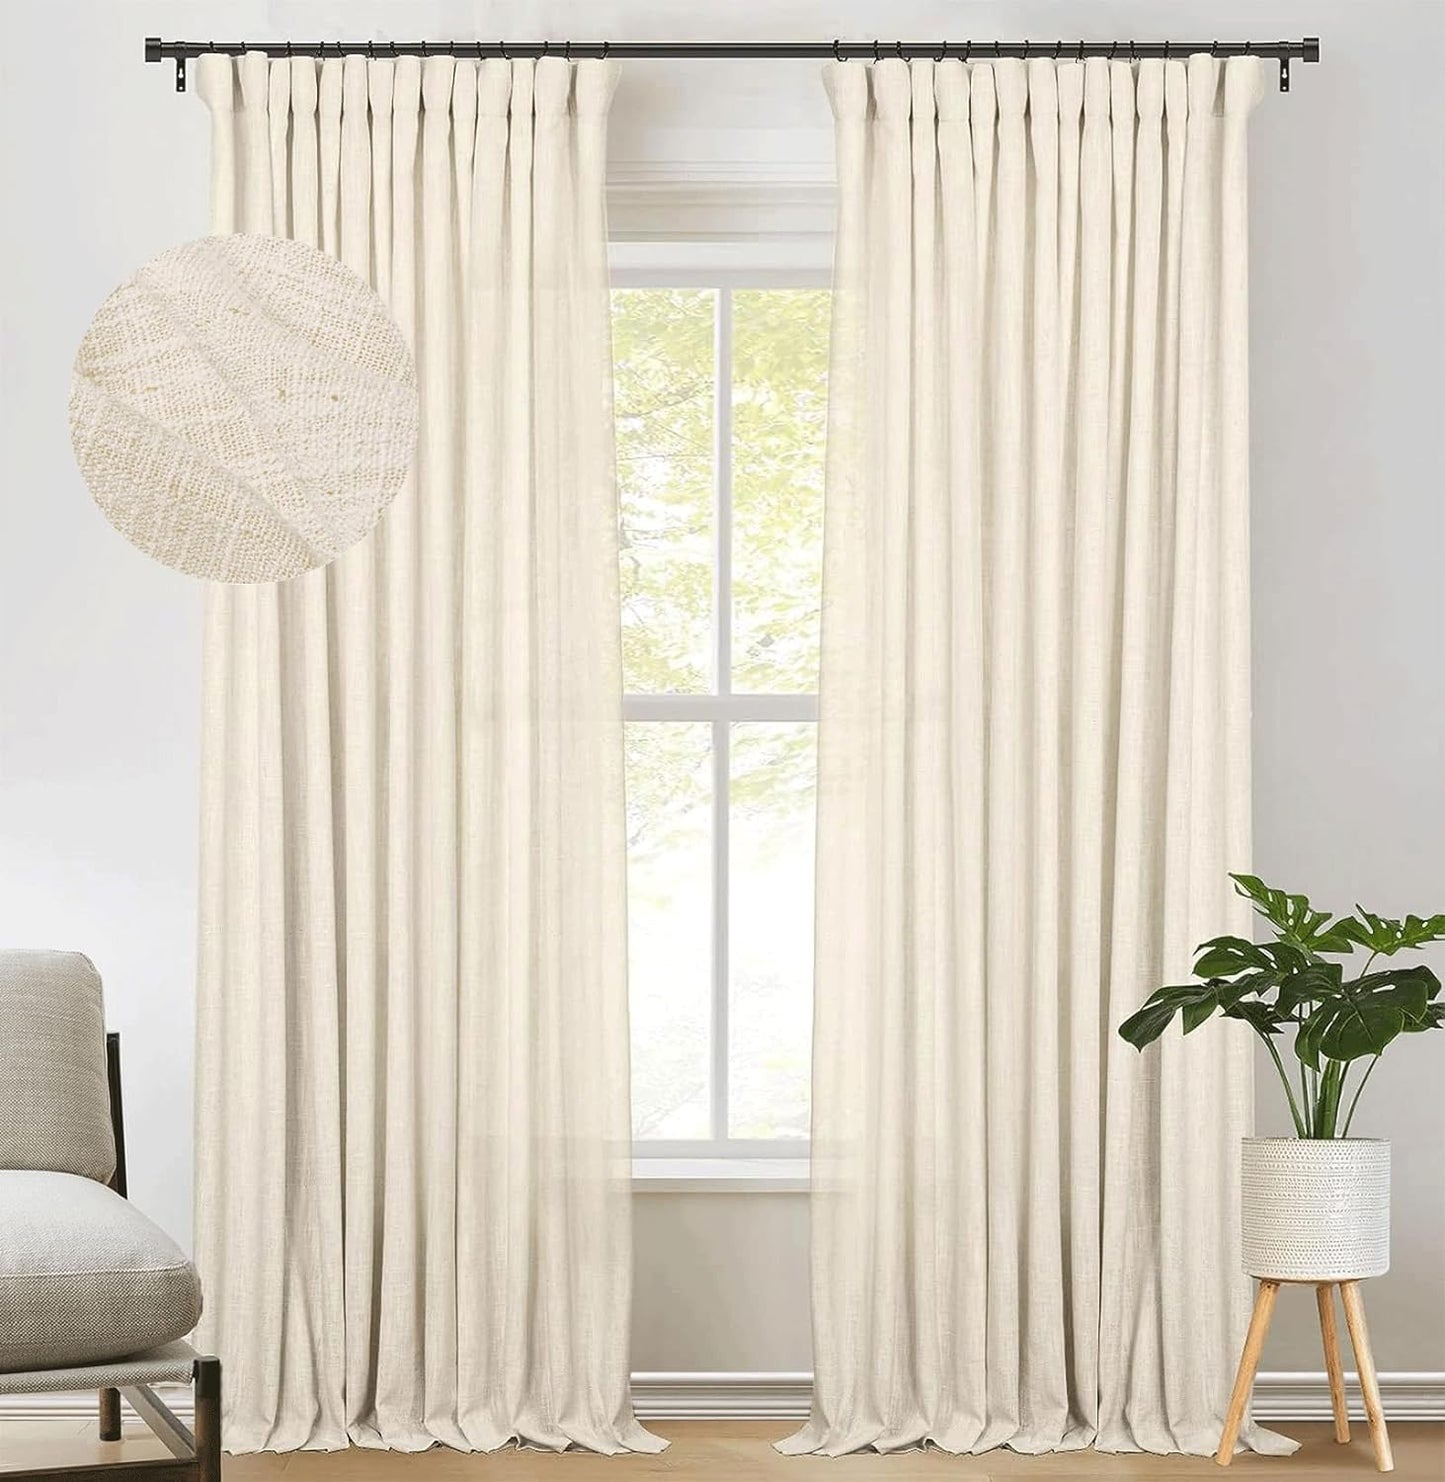 Zeerobee Beige White Linen Curtains for Living Room/Bedroom Linen Curtains 96 Inches Long 2 Panels Linen Drapes Farmhouse Pinch Pleated Curtains Light Filtering Privacy Curtains, W50 X L96  zeerobee 05 Beige 50"W X 90"L 